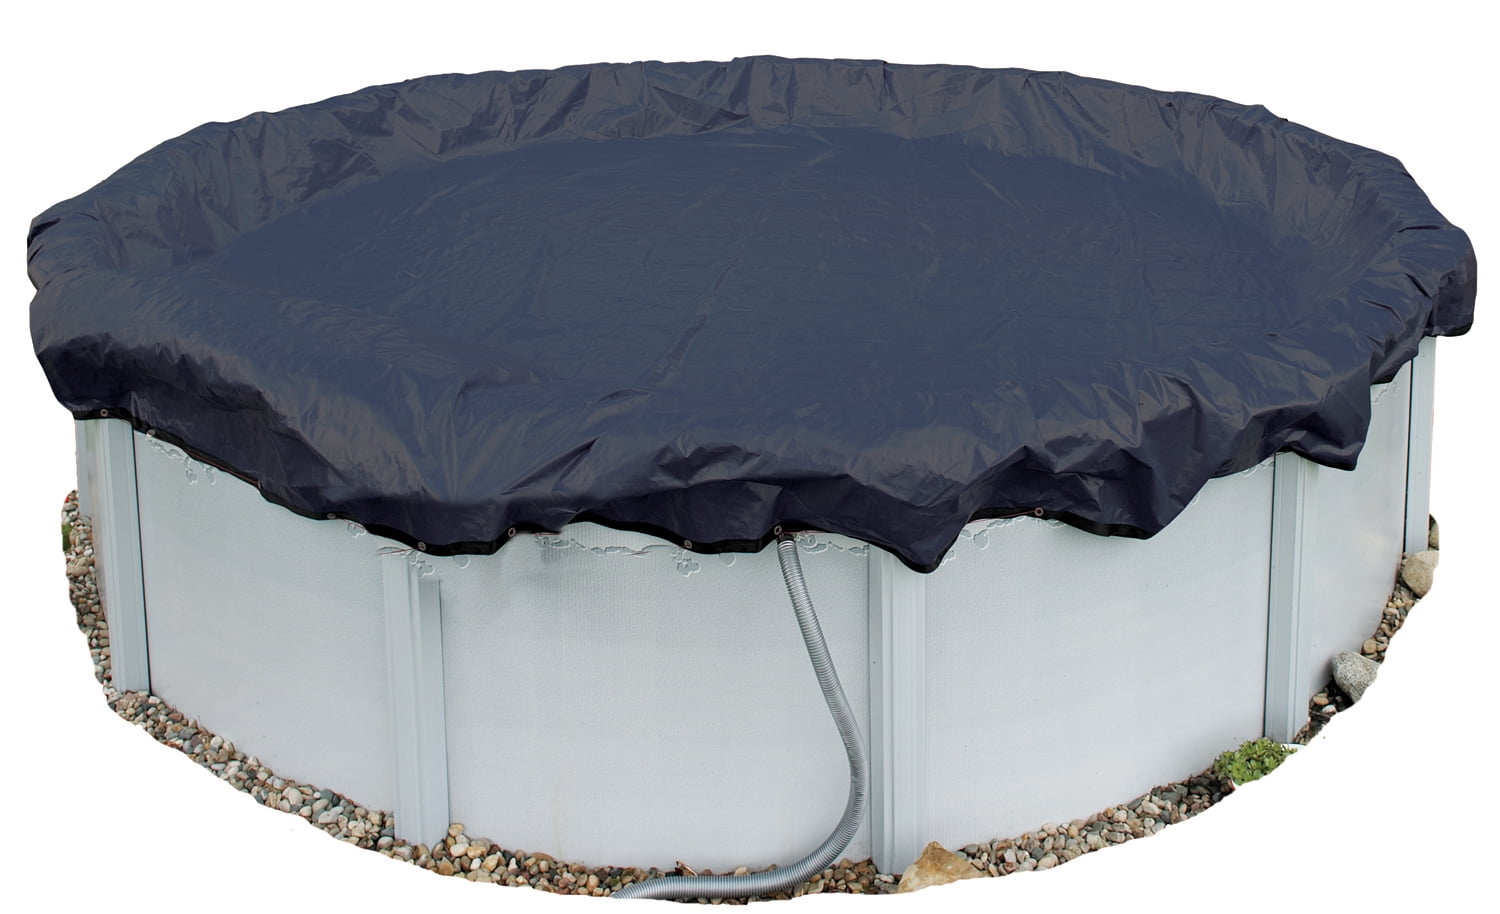 Winter Pool Cover Above Ground 24 Ft Round Arctic Armor 8Yr Warranty w/ Clips 